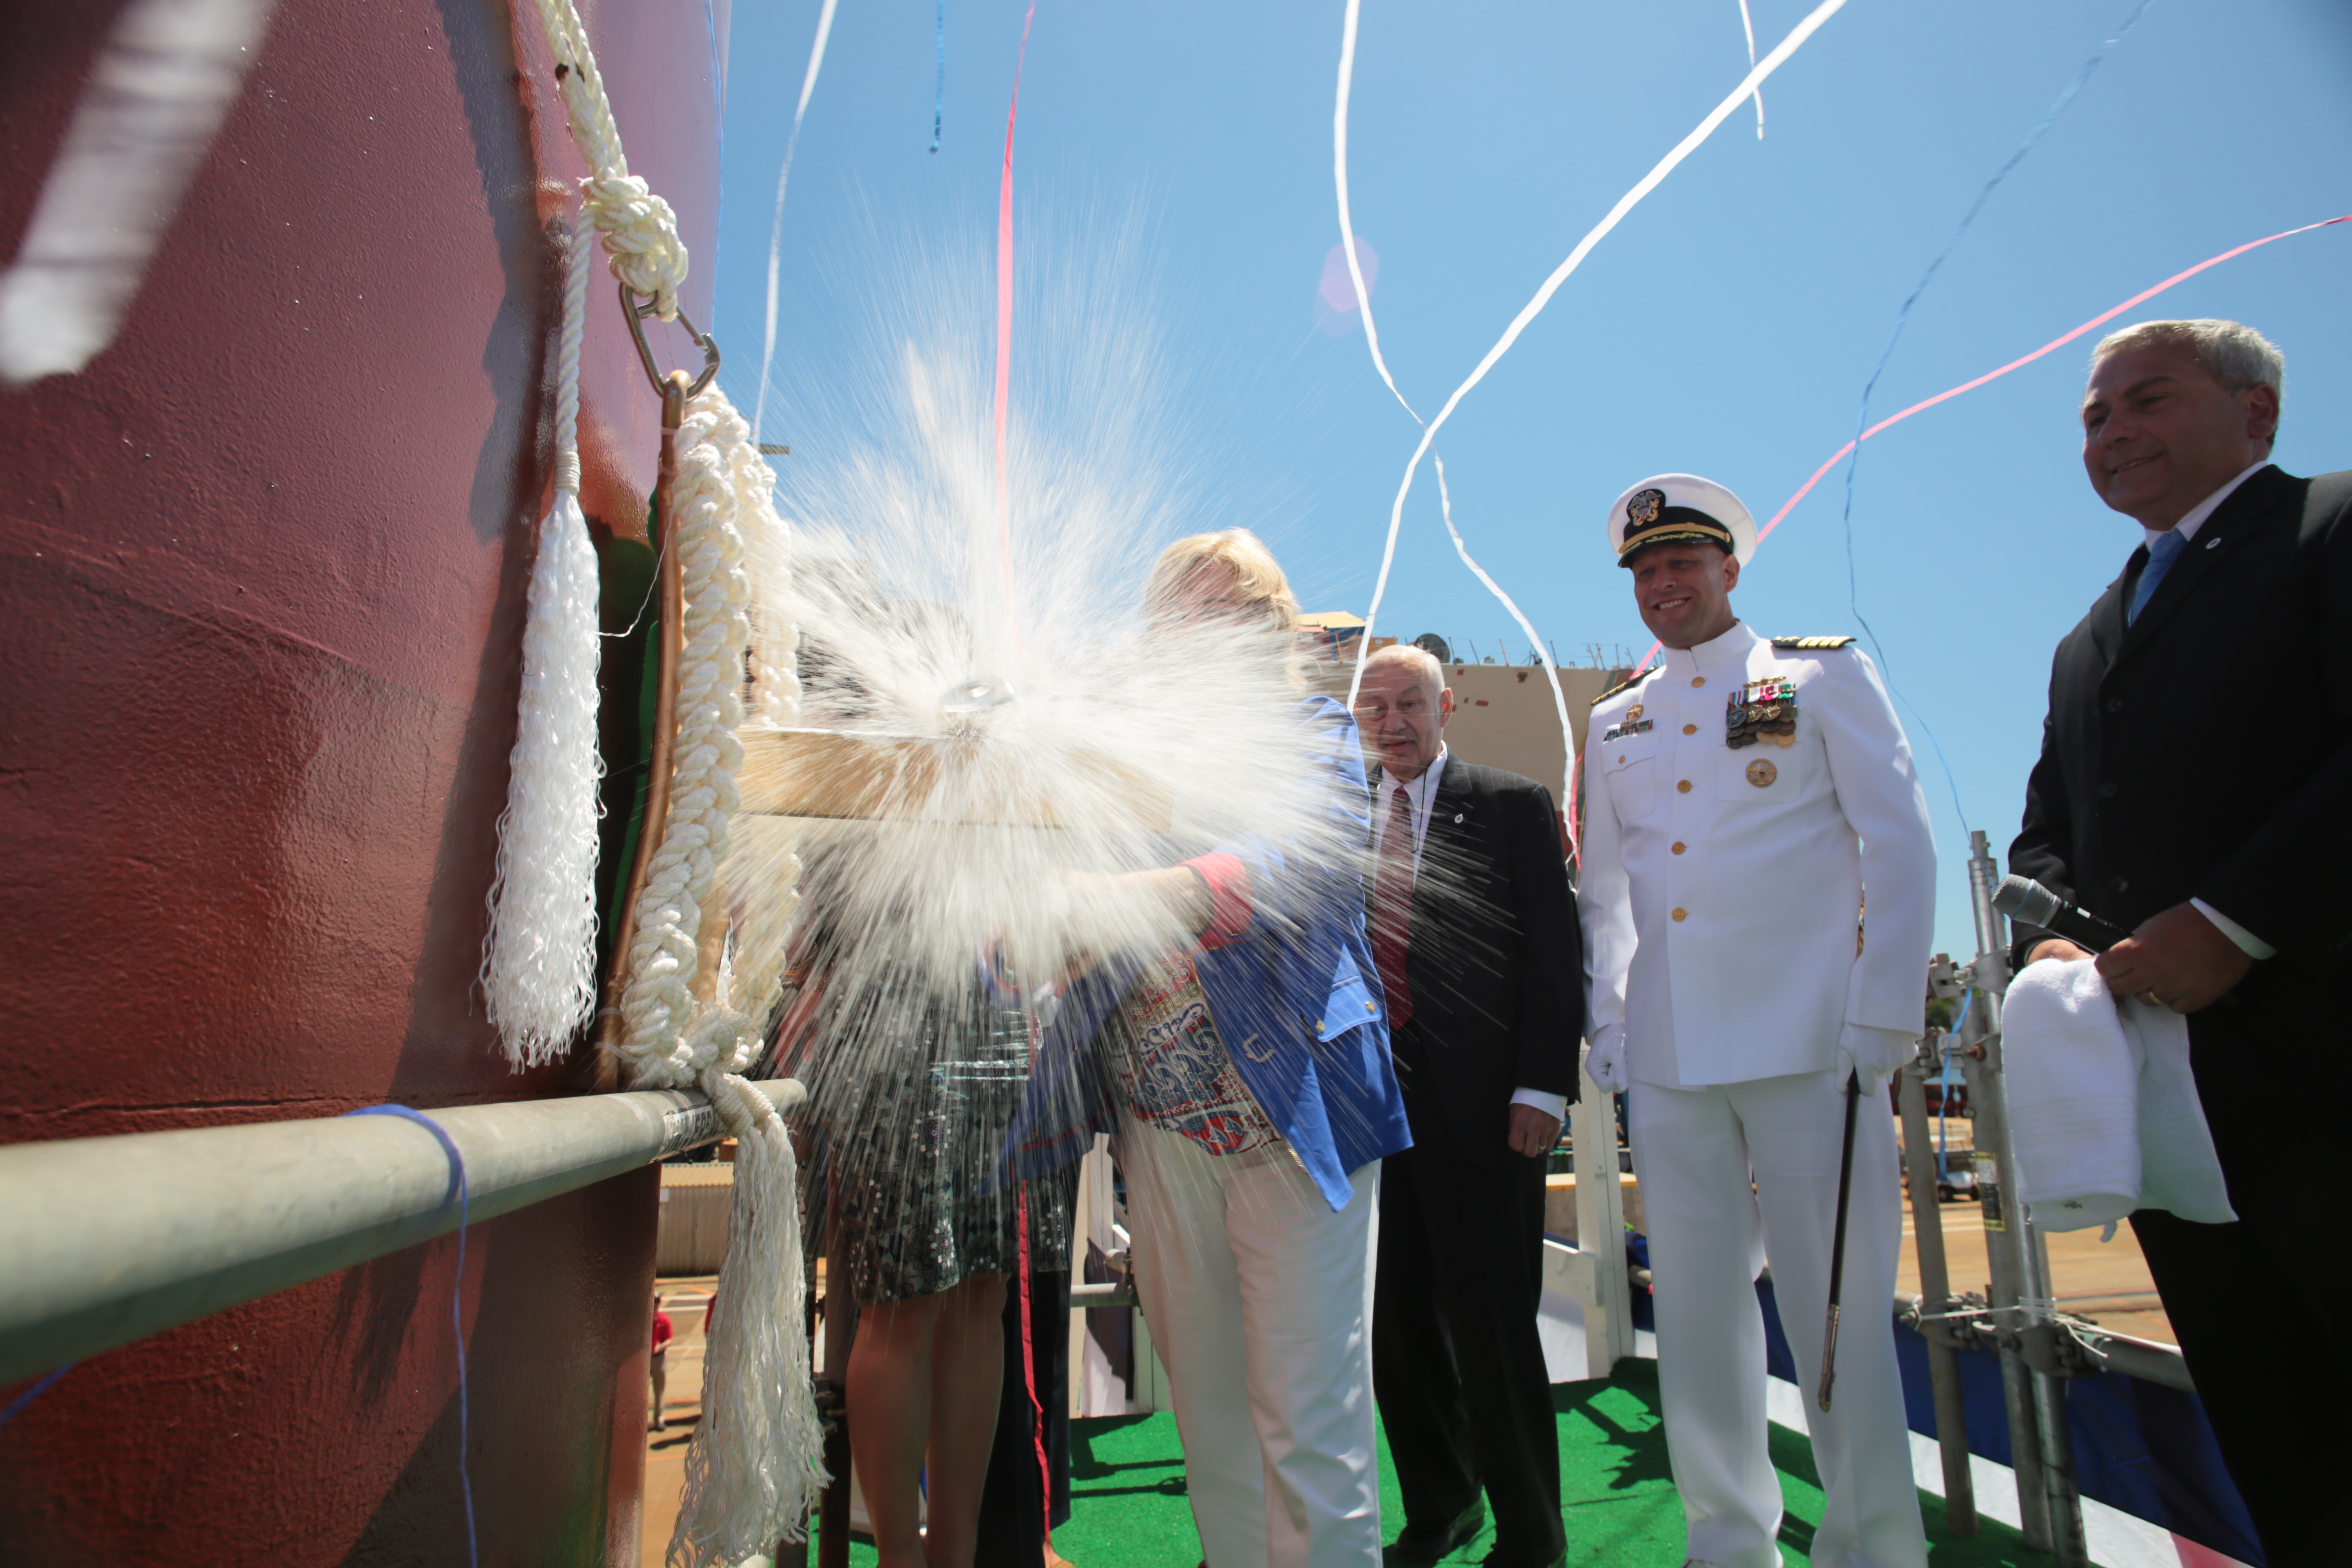 Sally Monsoor christens the future USS Michael Monsoor (DDG 1001), which is named in honor of her son, Medal of Honor recipient Navy Petty Officer 2nd Class (SEAL) Michael A. Monsoor. US Navy photo.